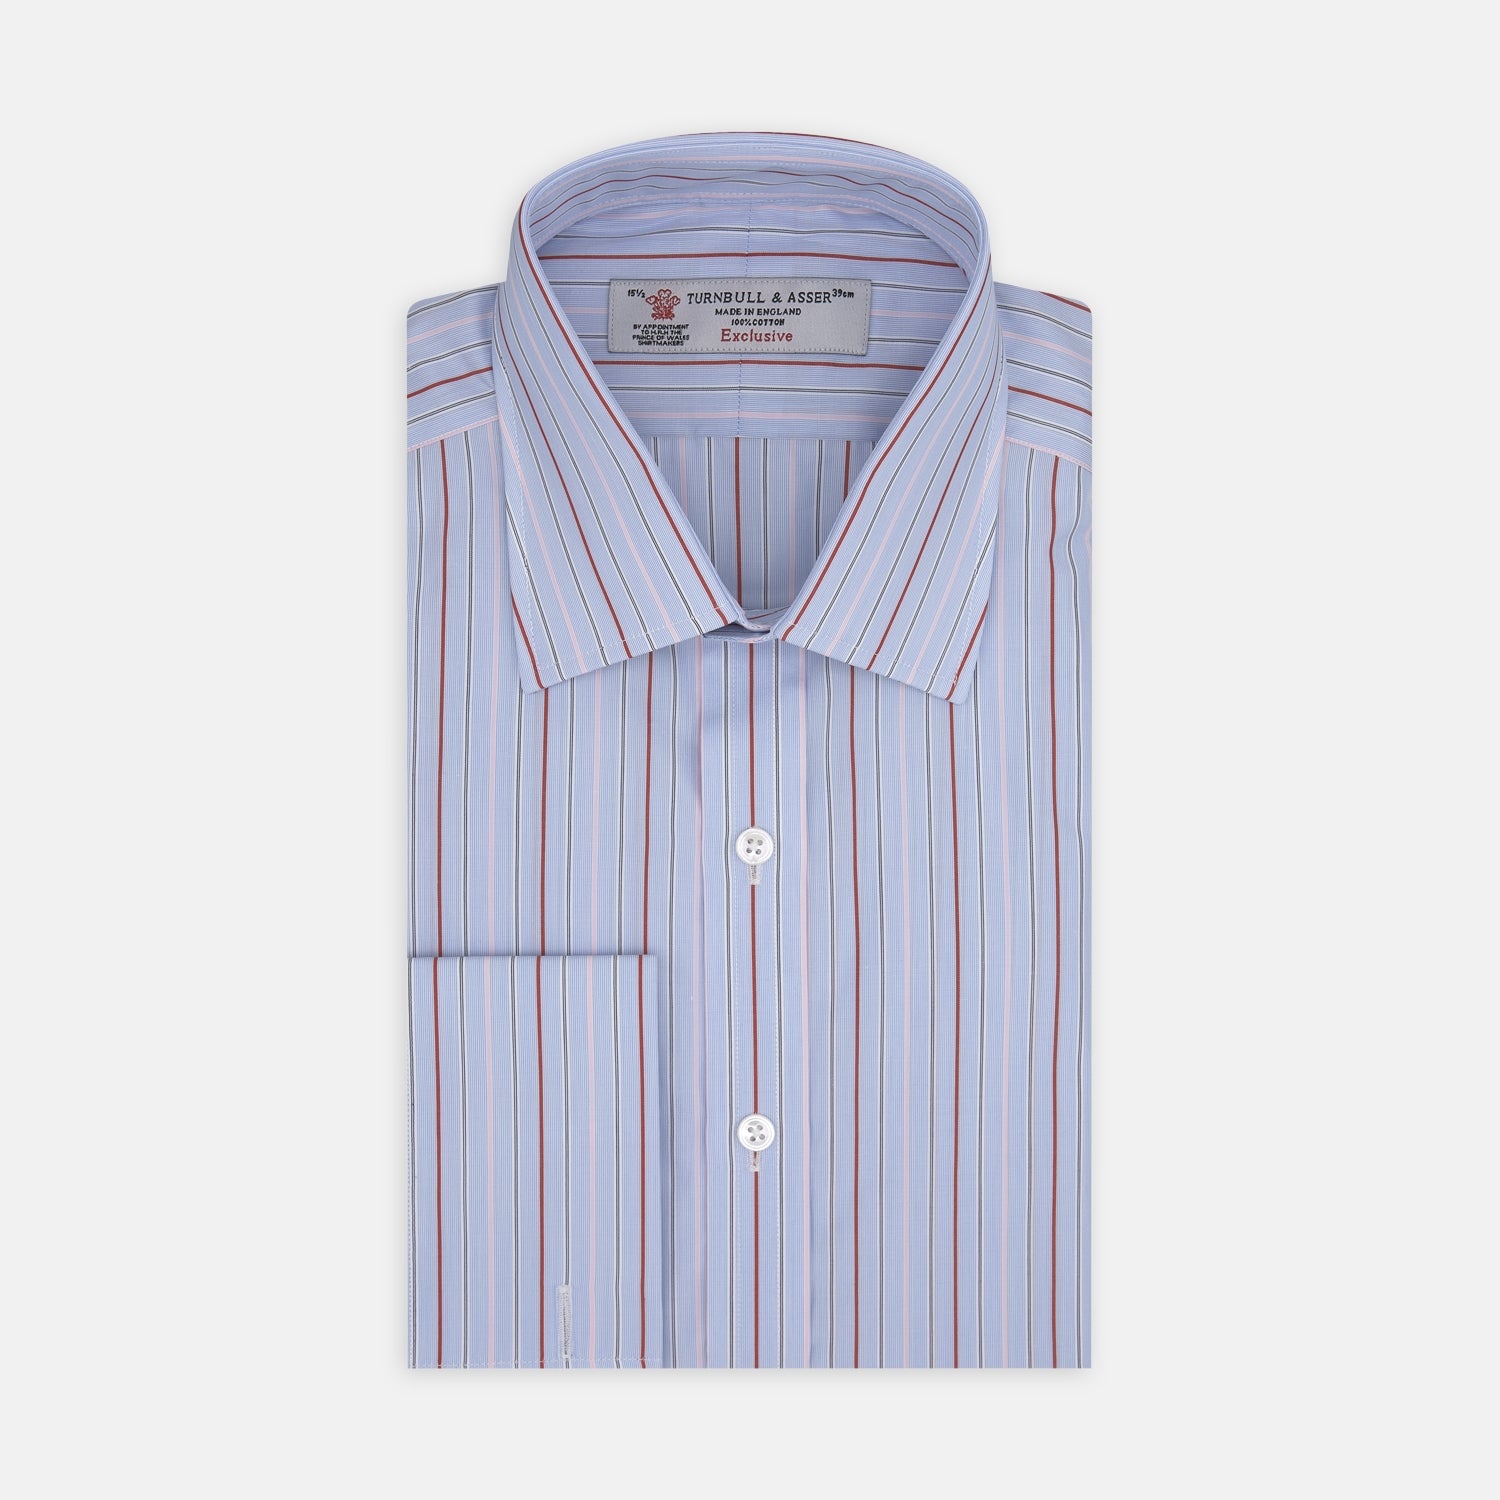 Red and Blue Stripe Sea Island Quality Cotton Shirt with T&A Collar and Double Cuffs